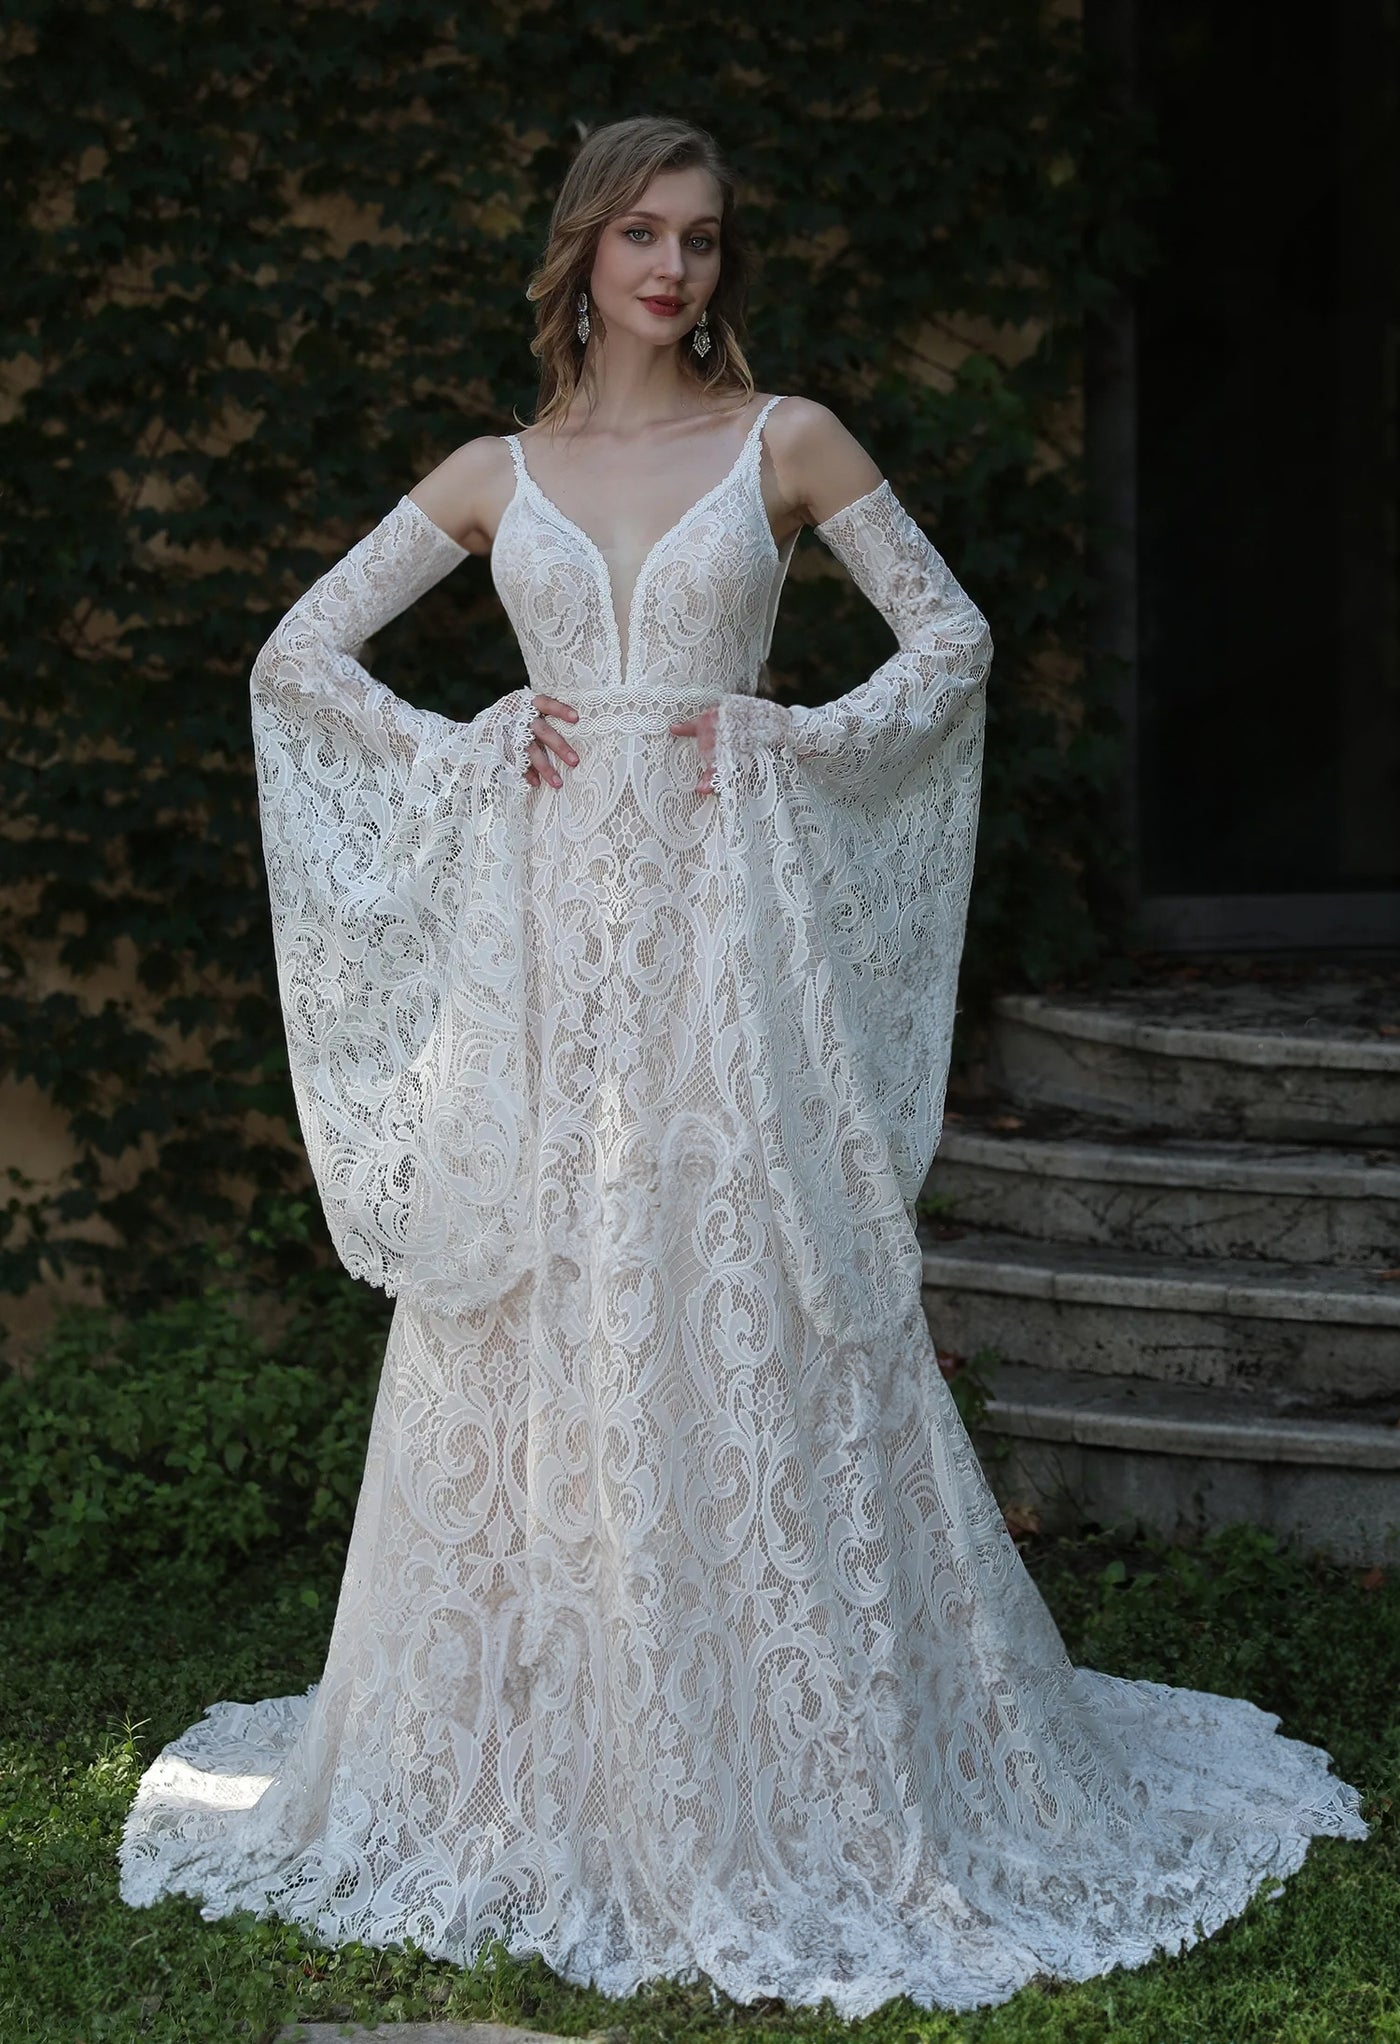 A Boho Lace Wedding Dress With Spaghetti Straps and Removable Bell Sleeves available at Bergamot Bridal, a bridal shop in London.